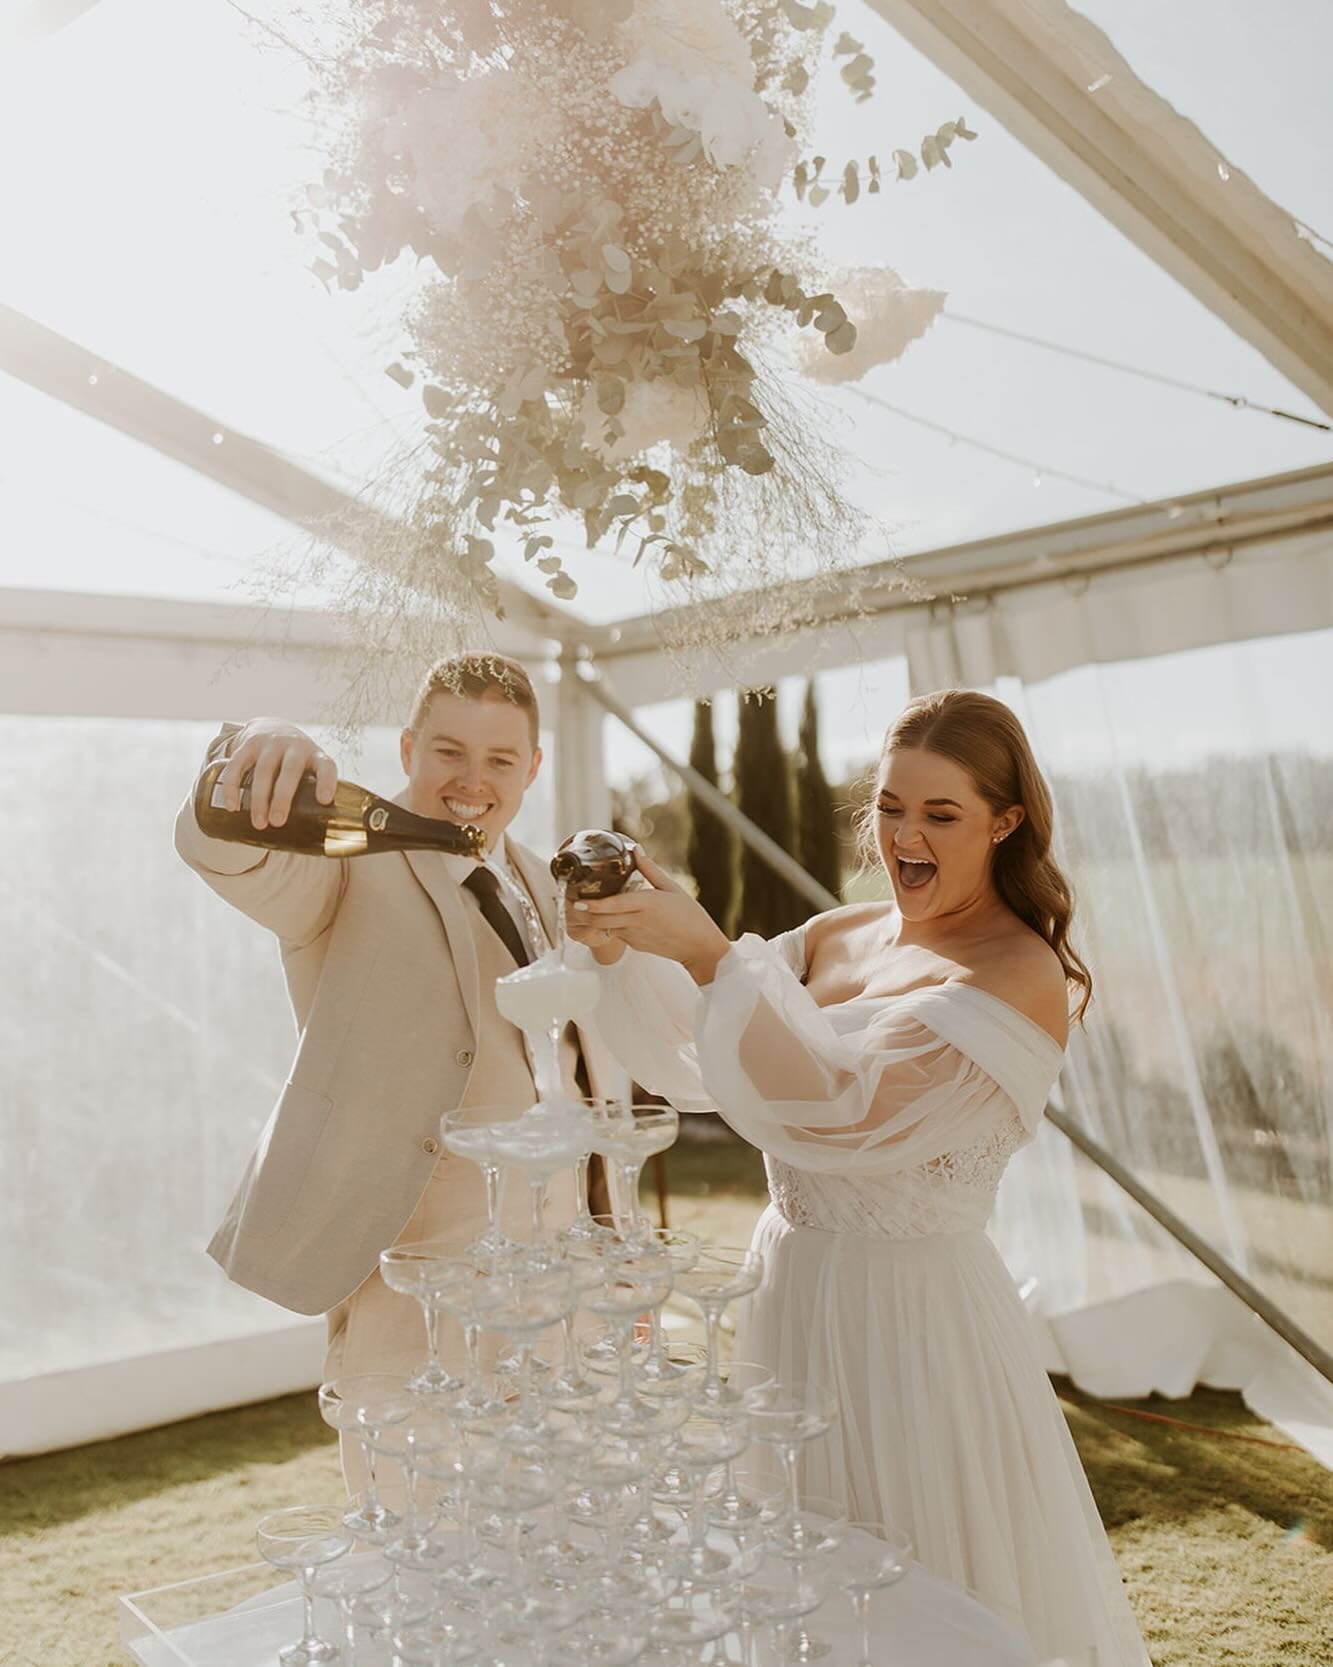 Mikaela and Nick&rsquo;s garden wedding: where dreams met reality. Our end-to-end event planning, styling, and design added a touch of romance, refinement and sophistication. Delicate whites amidst lush greenery, creating unforgettable moments. Ready